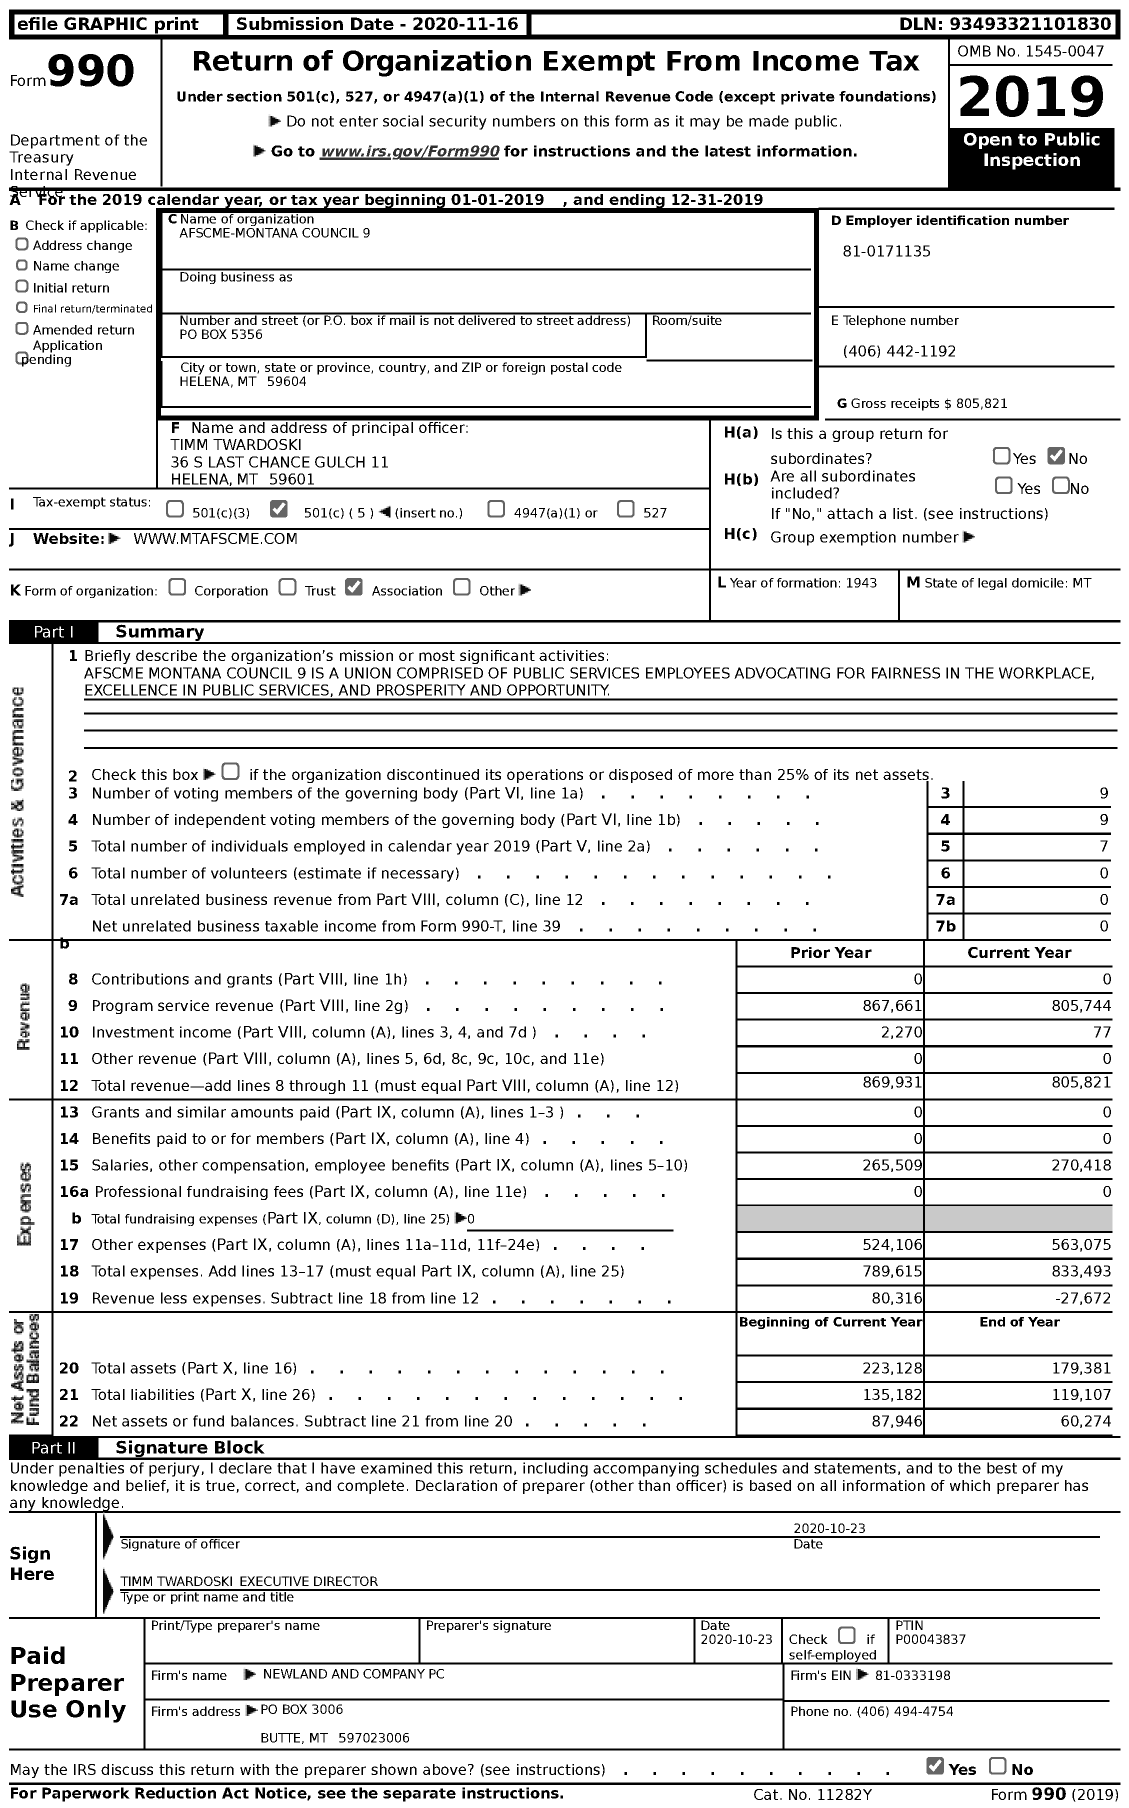 Image of first page of 2019 Form 990 for American Federation of State County & Municipal Employees - C0009MT Montana State Council 9